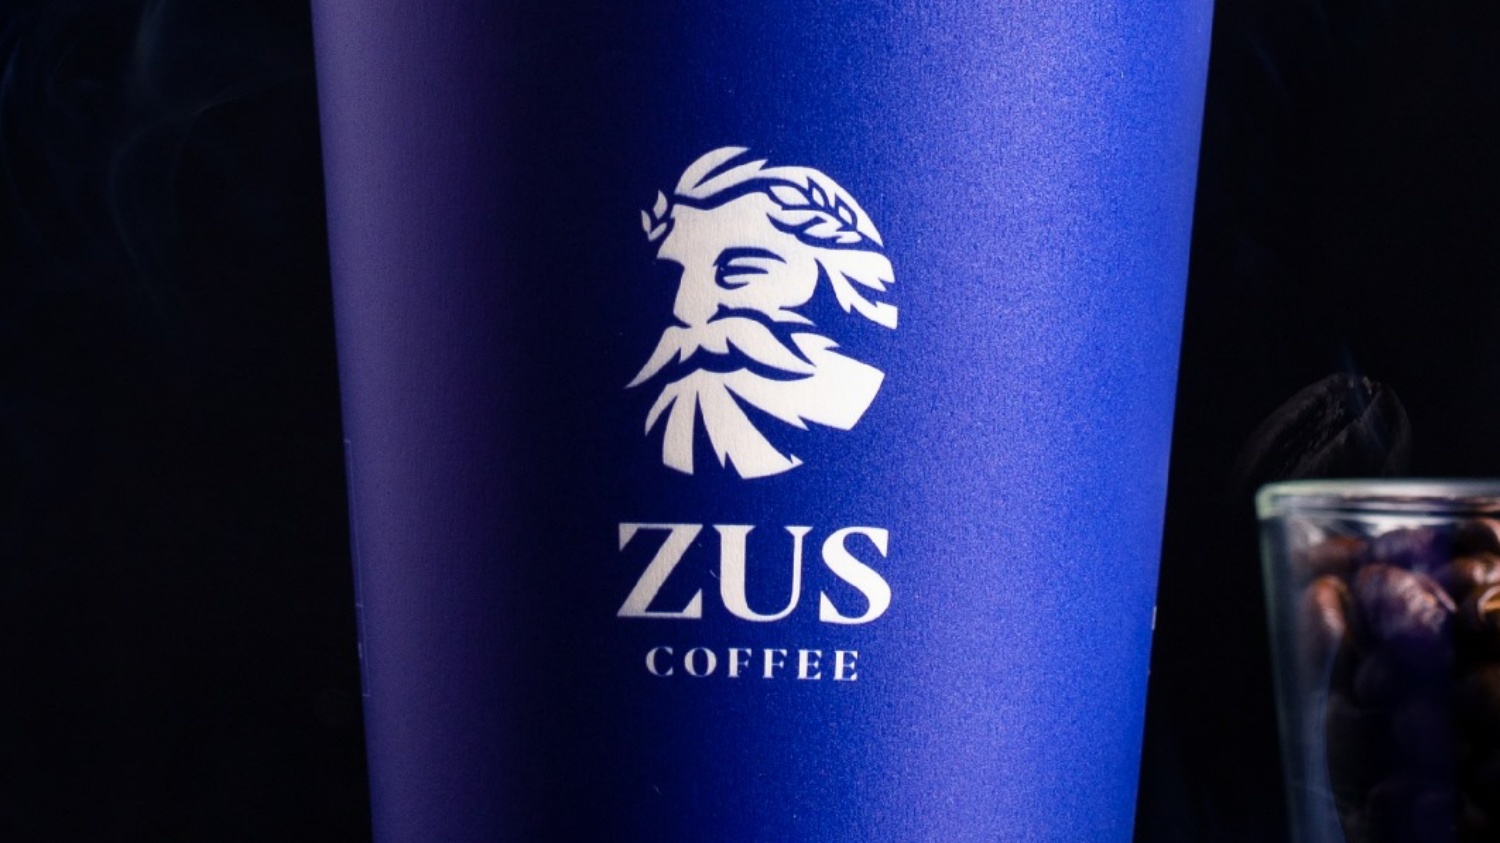 Zus coffee straw can eat